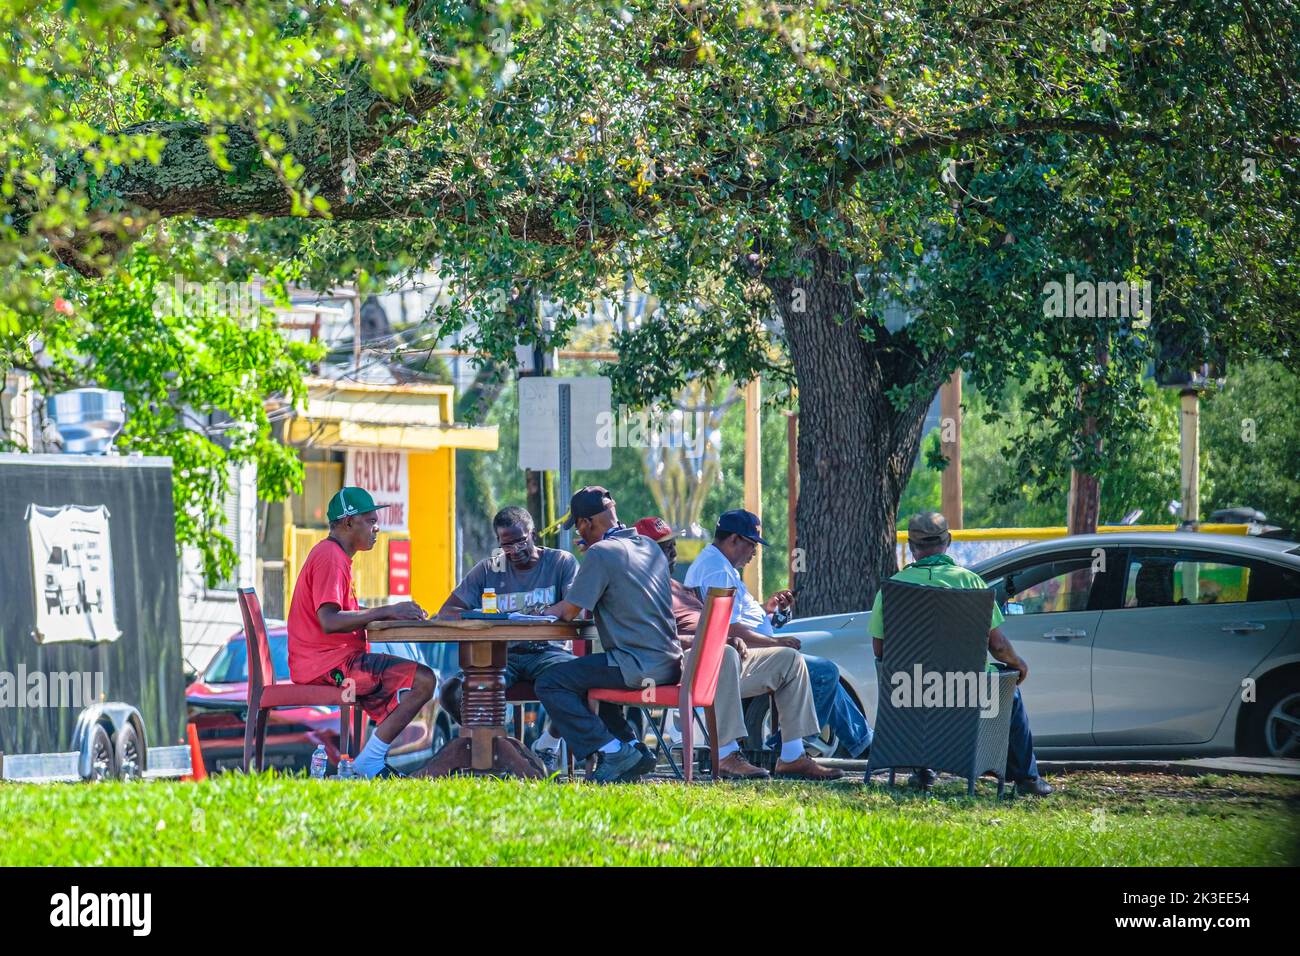 NEW ORLEANS, LA, USA - APRIL 20, 2020: Seniors playing dominoes on a Mid City median in the afternoon Stock Photo